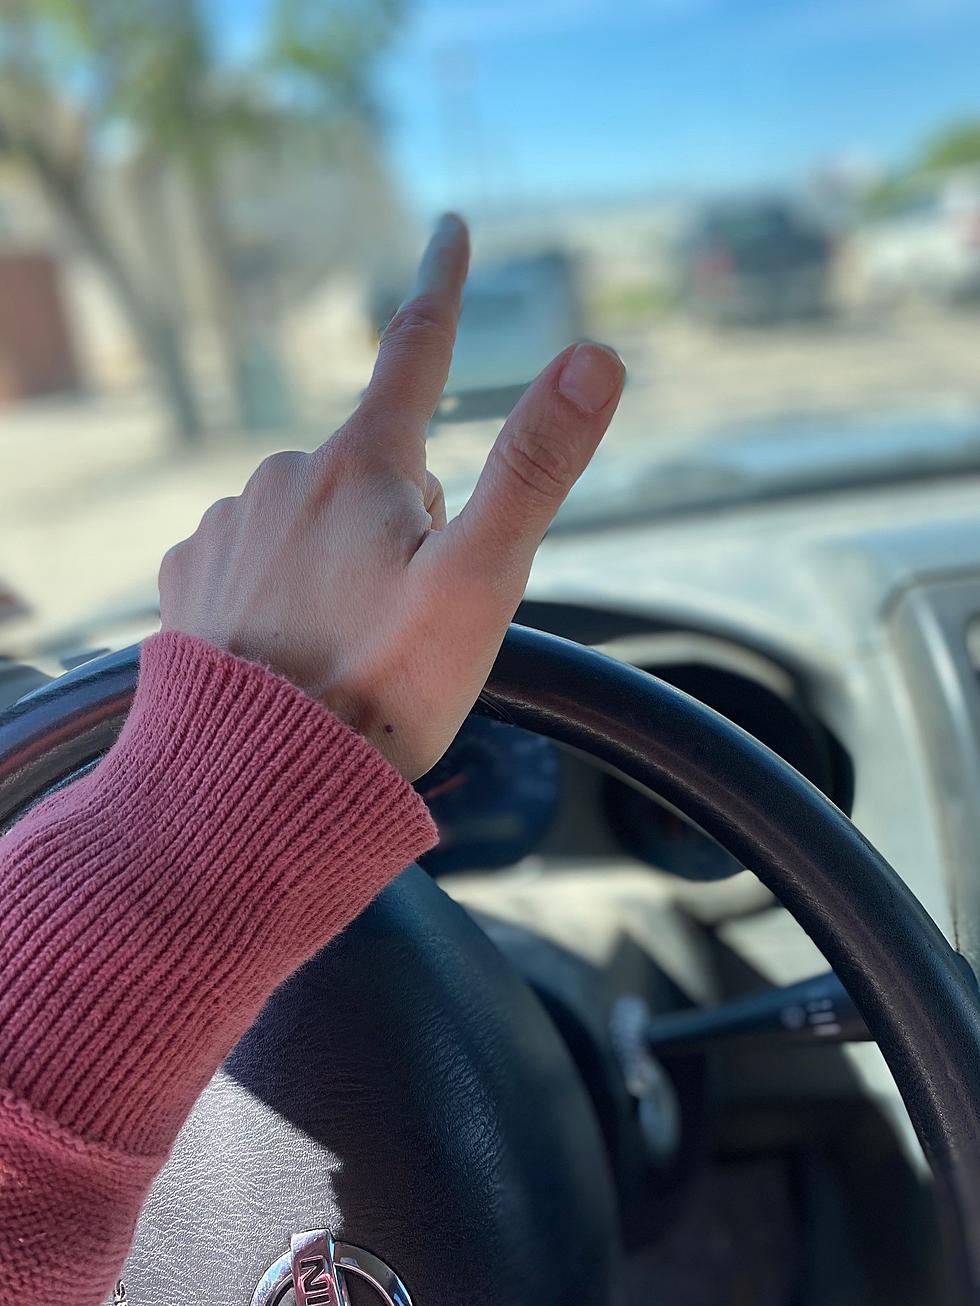 What&#8217;s The Right Way To Wave In Wyoming While Driving?